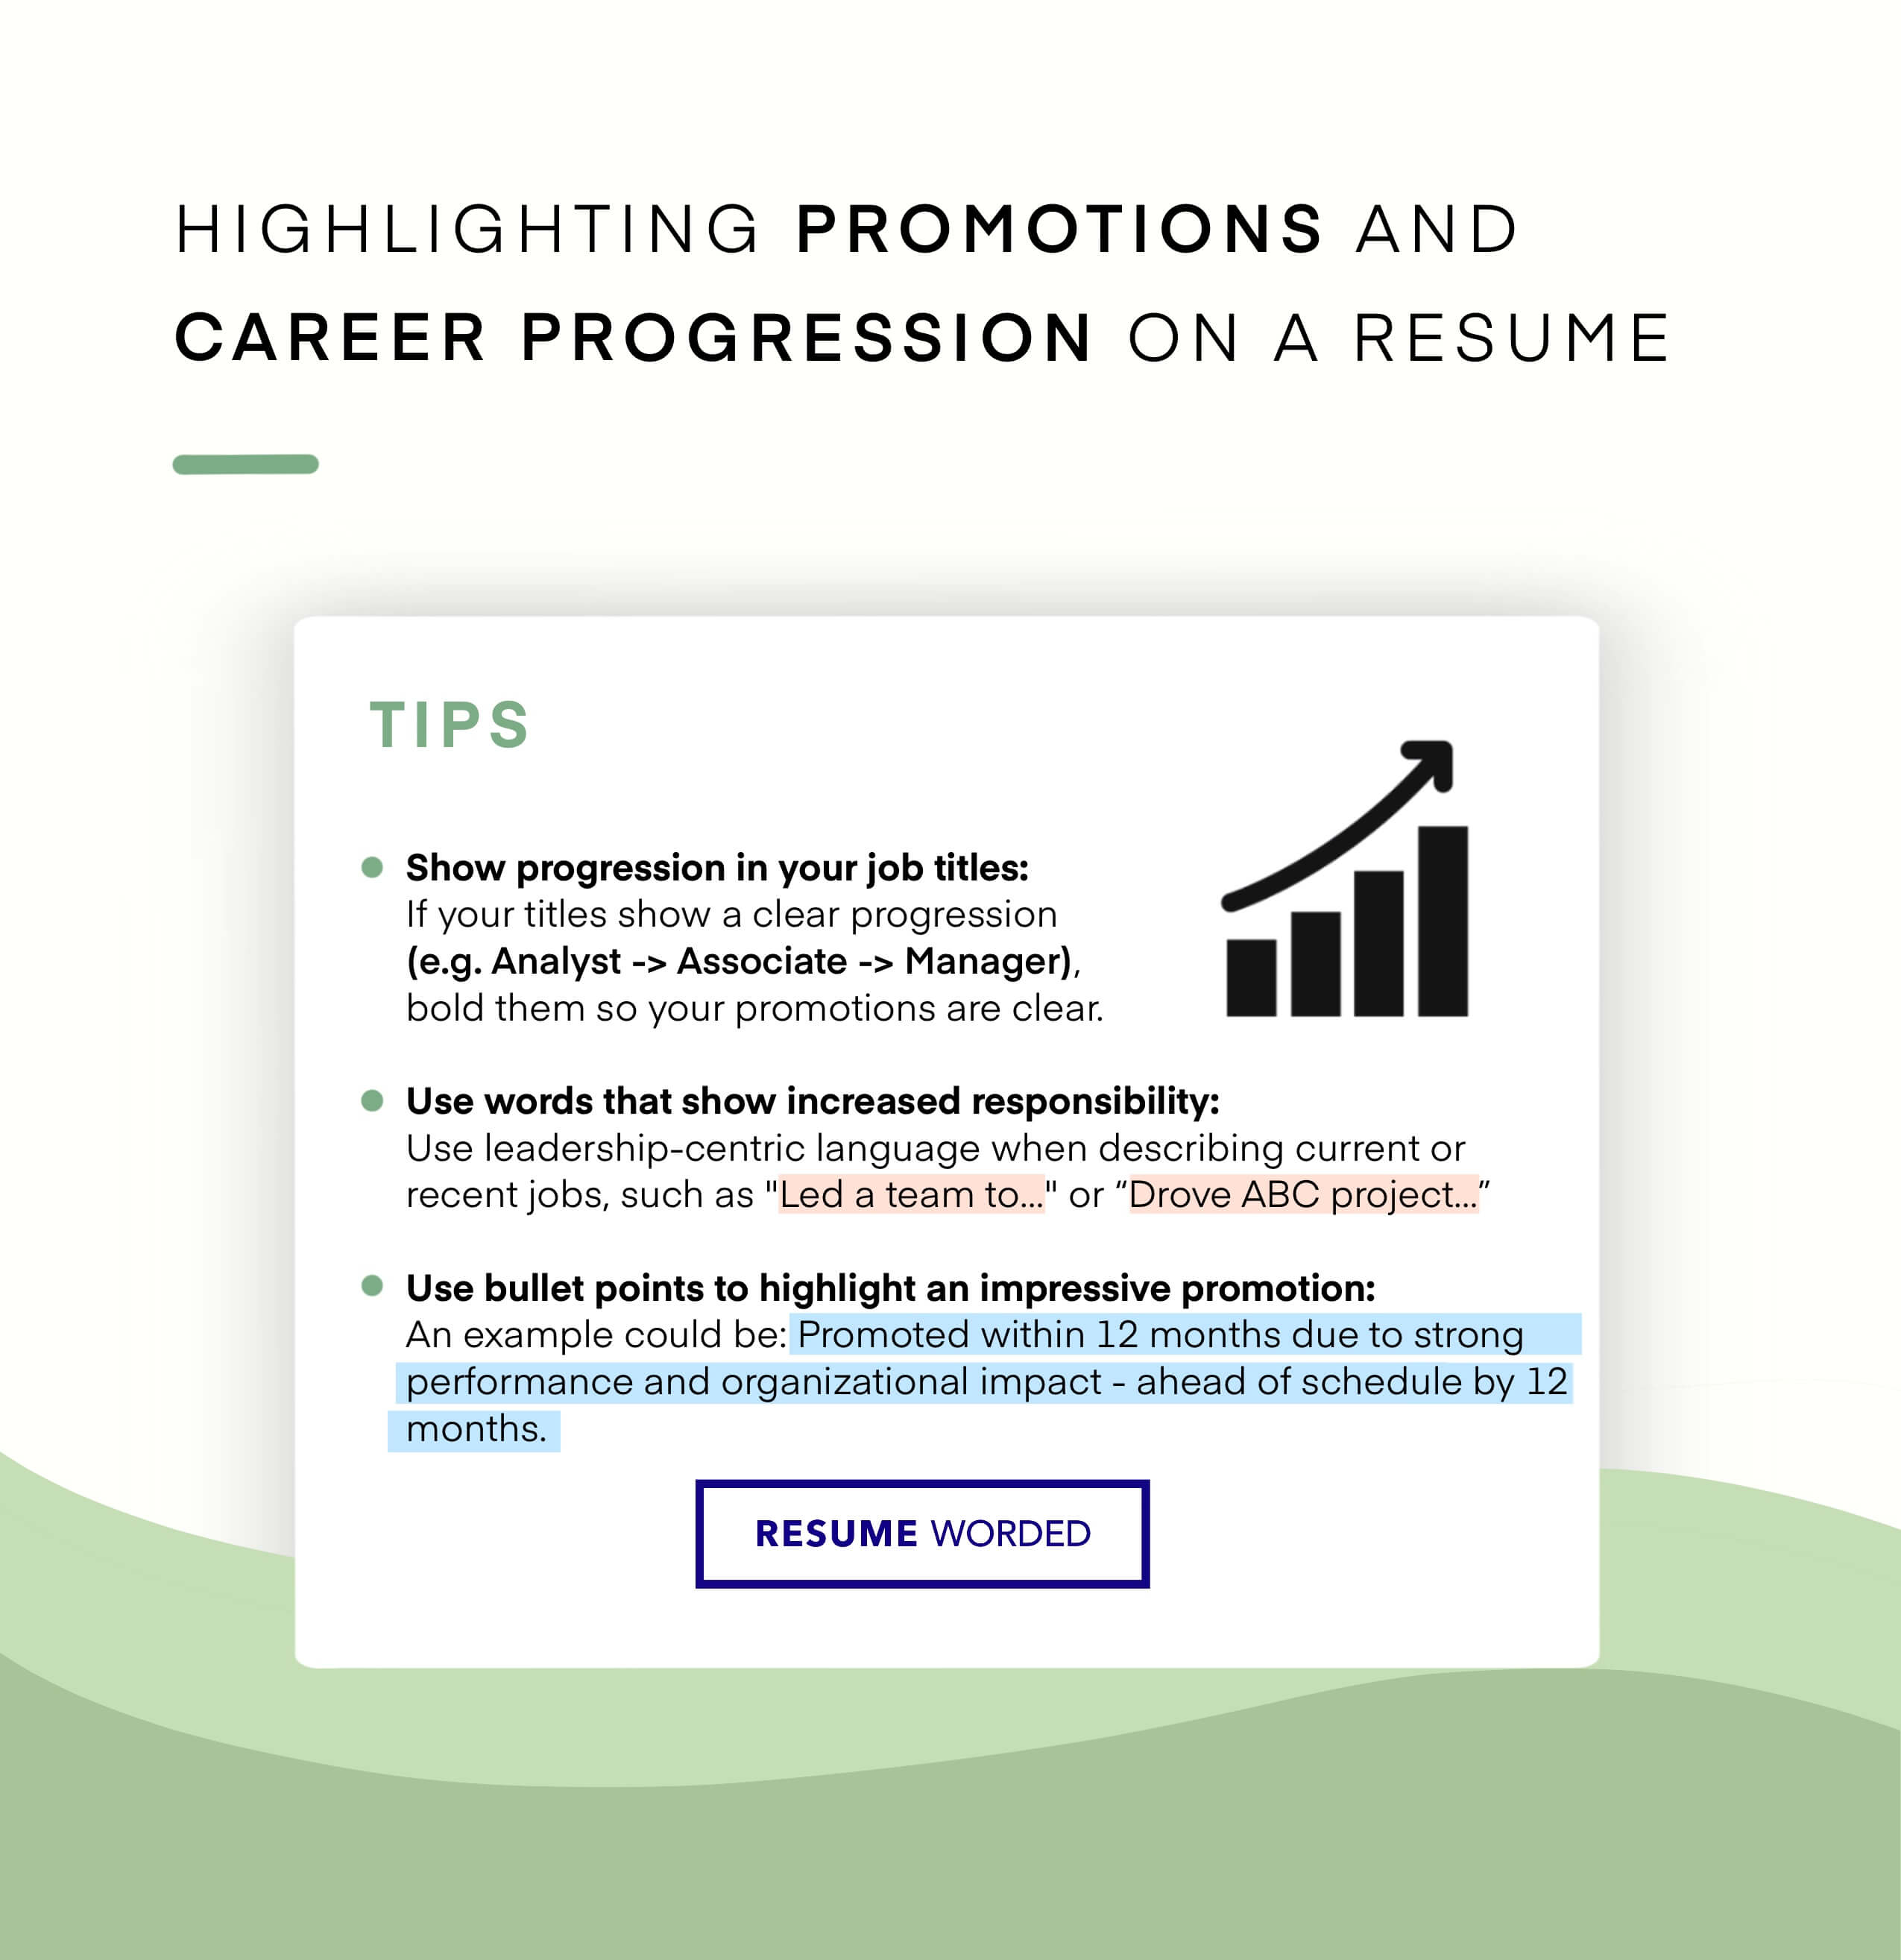 Shows career growth through promotions in finance roles - Chief Financial Officer (CFO) - 1 Resume